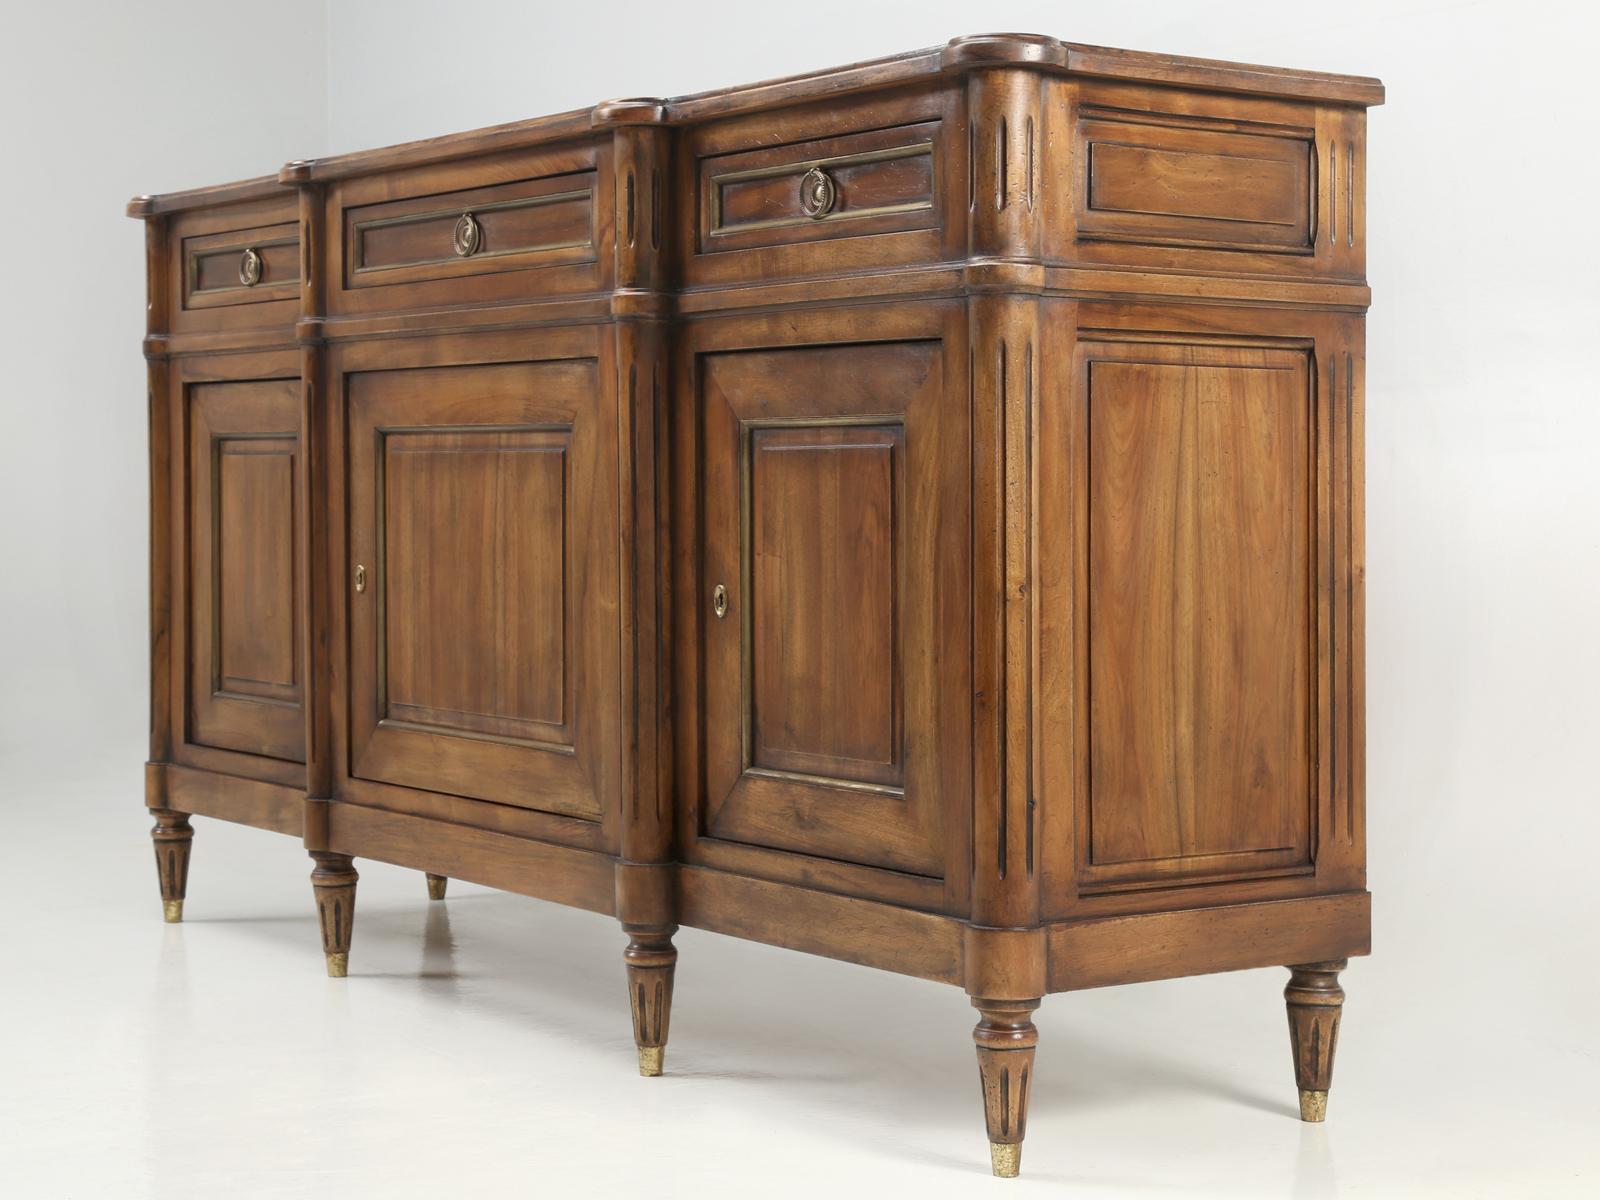 Vintage French Louis XVI style buffet constructed from solid walnut and accented with real brass trim. Our old plank restoration department removed the previous and discolored finish, without the use of any harsh chemicals and then applied an old